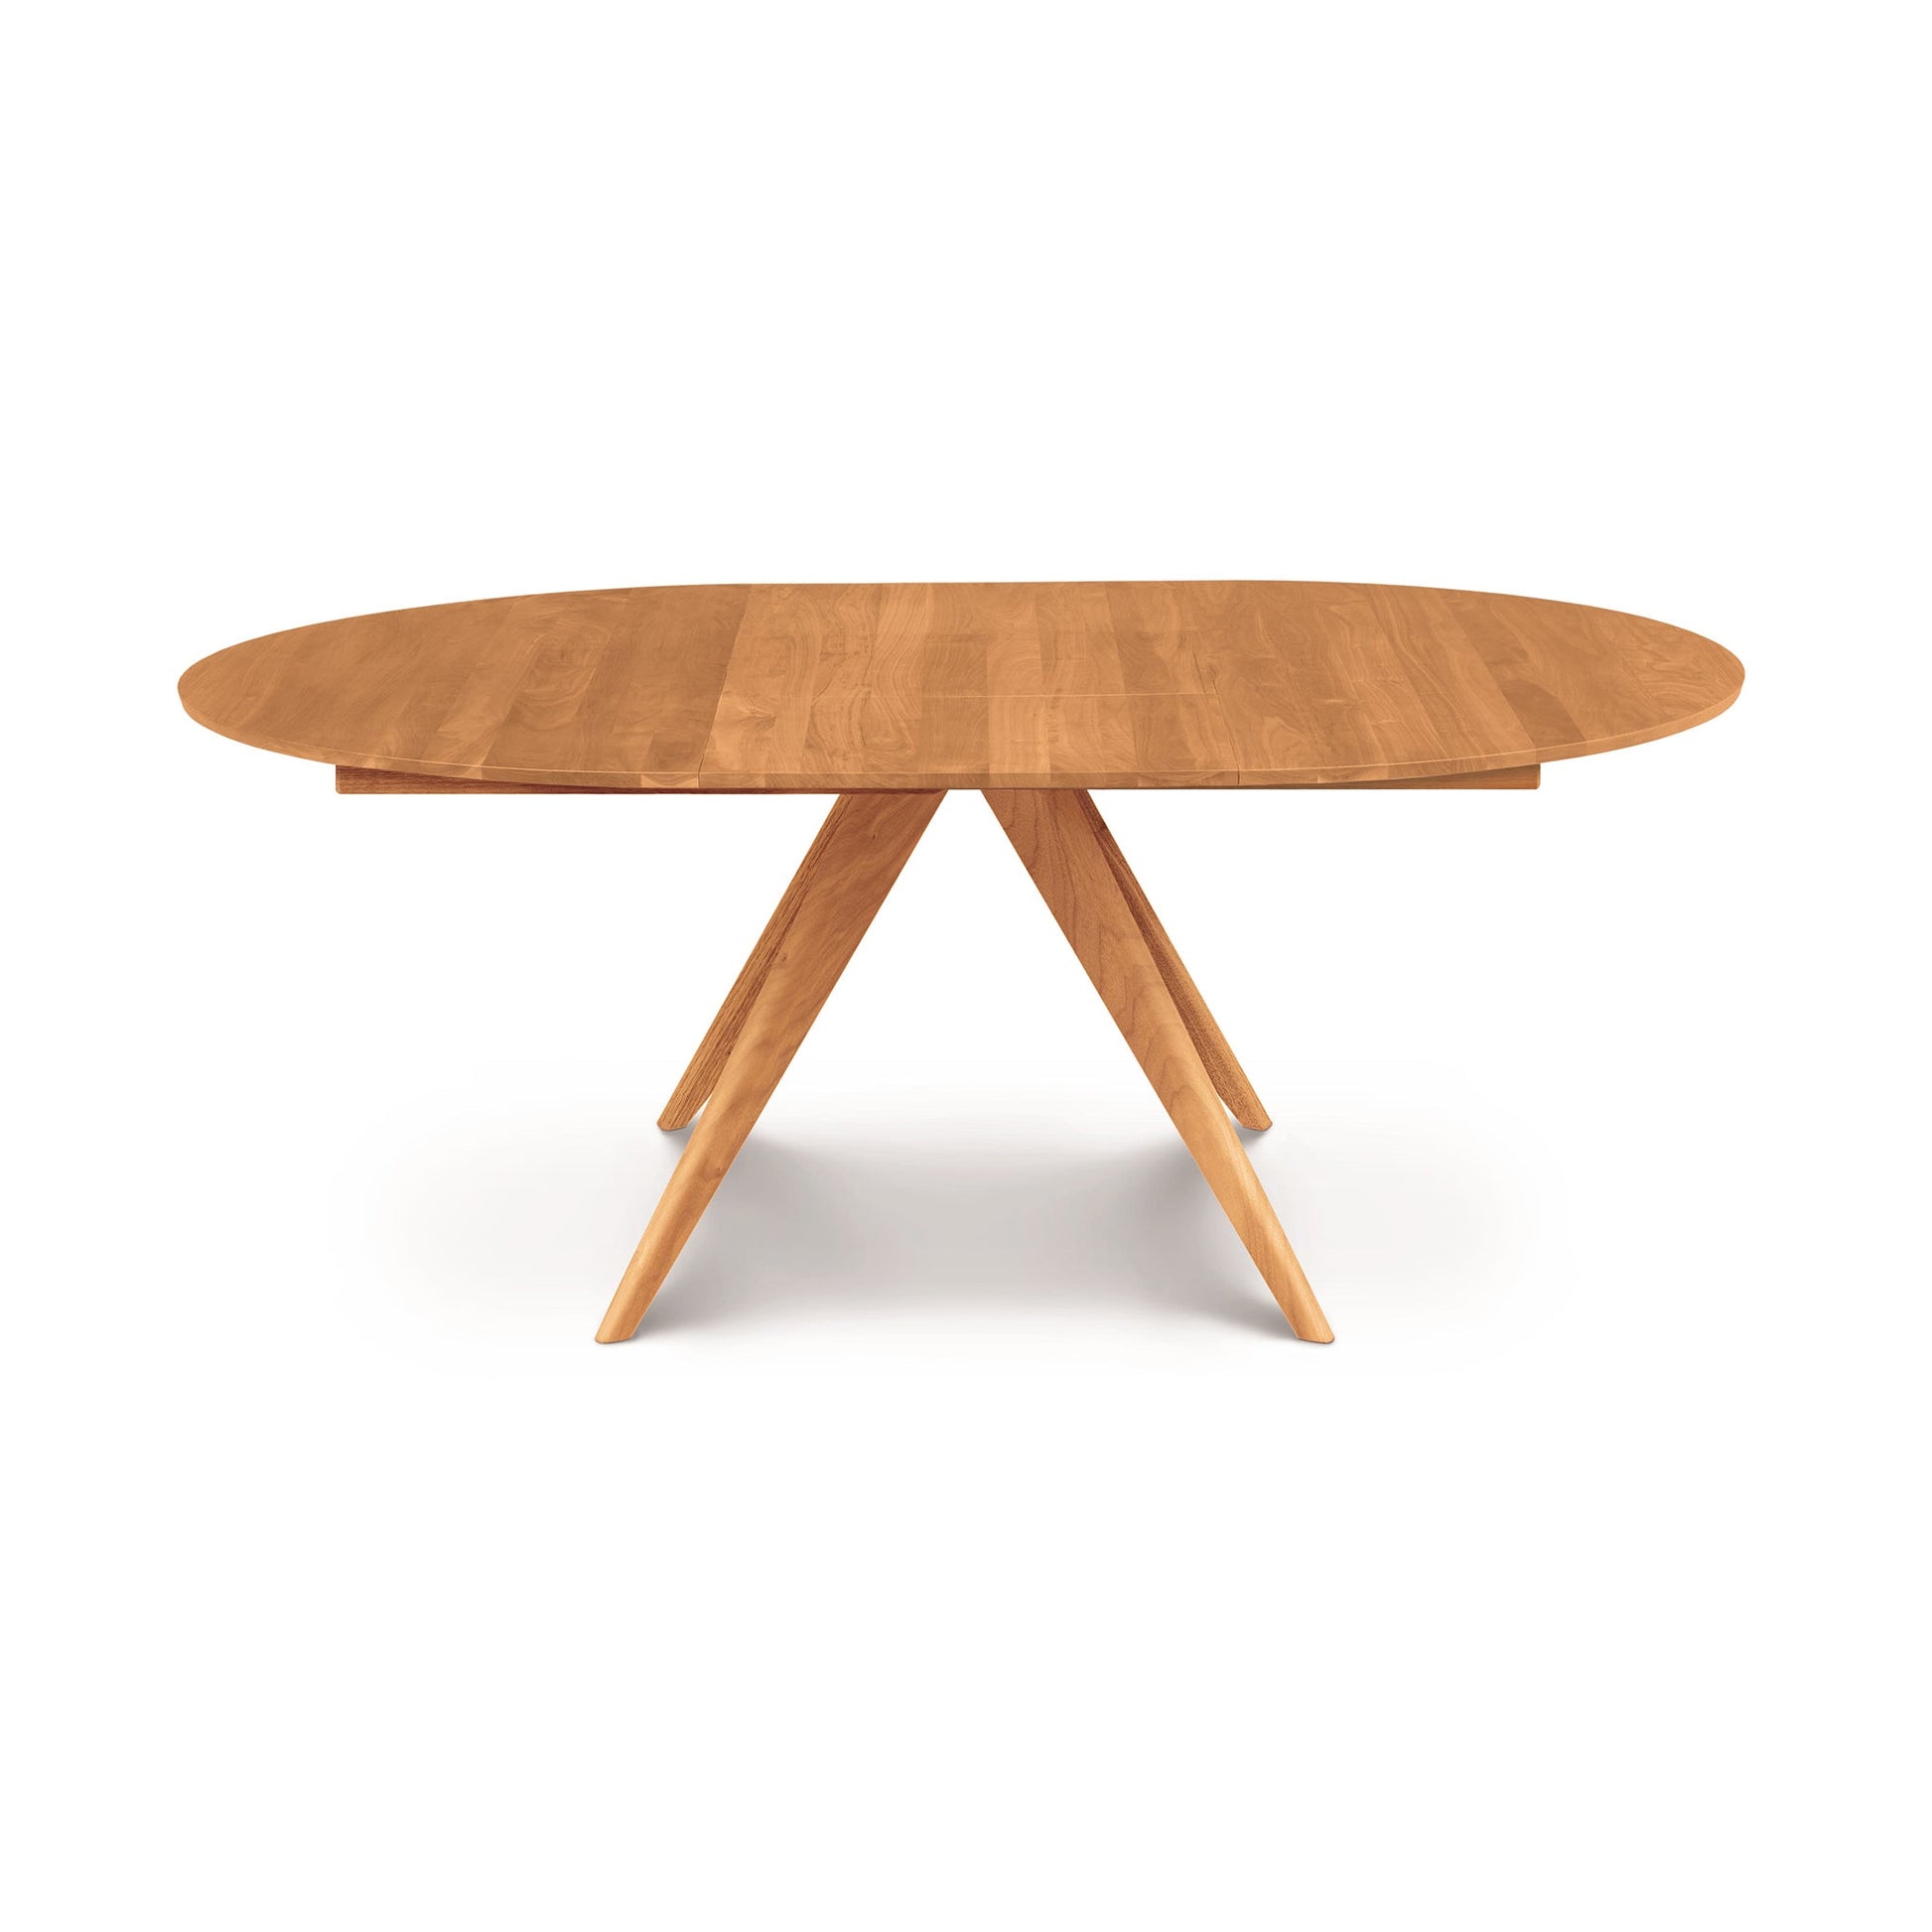 A wooden oval dining table with three legs.